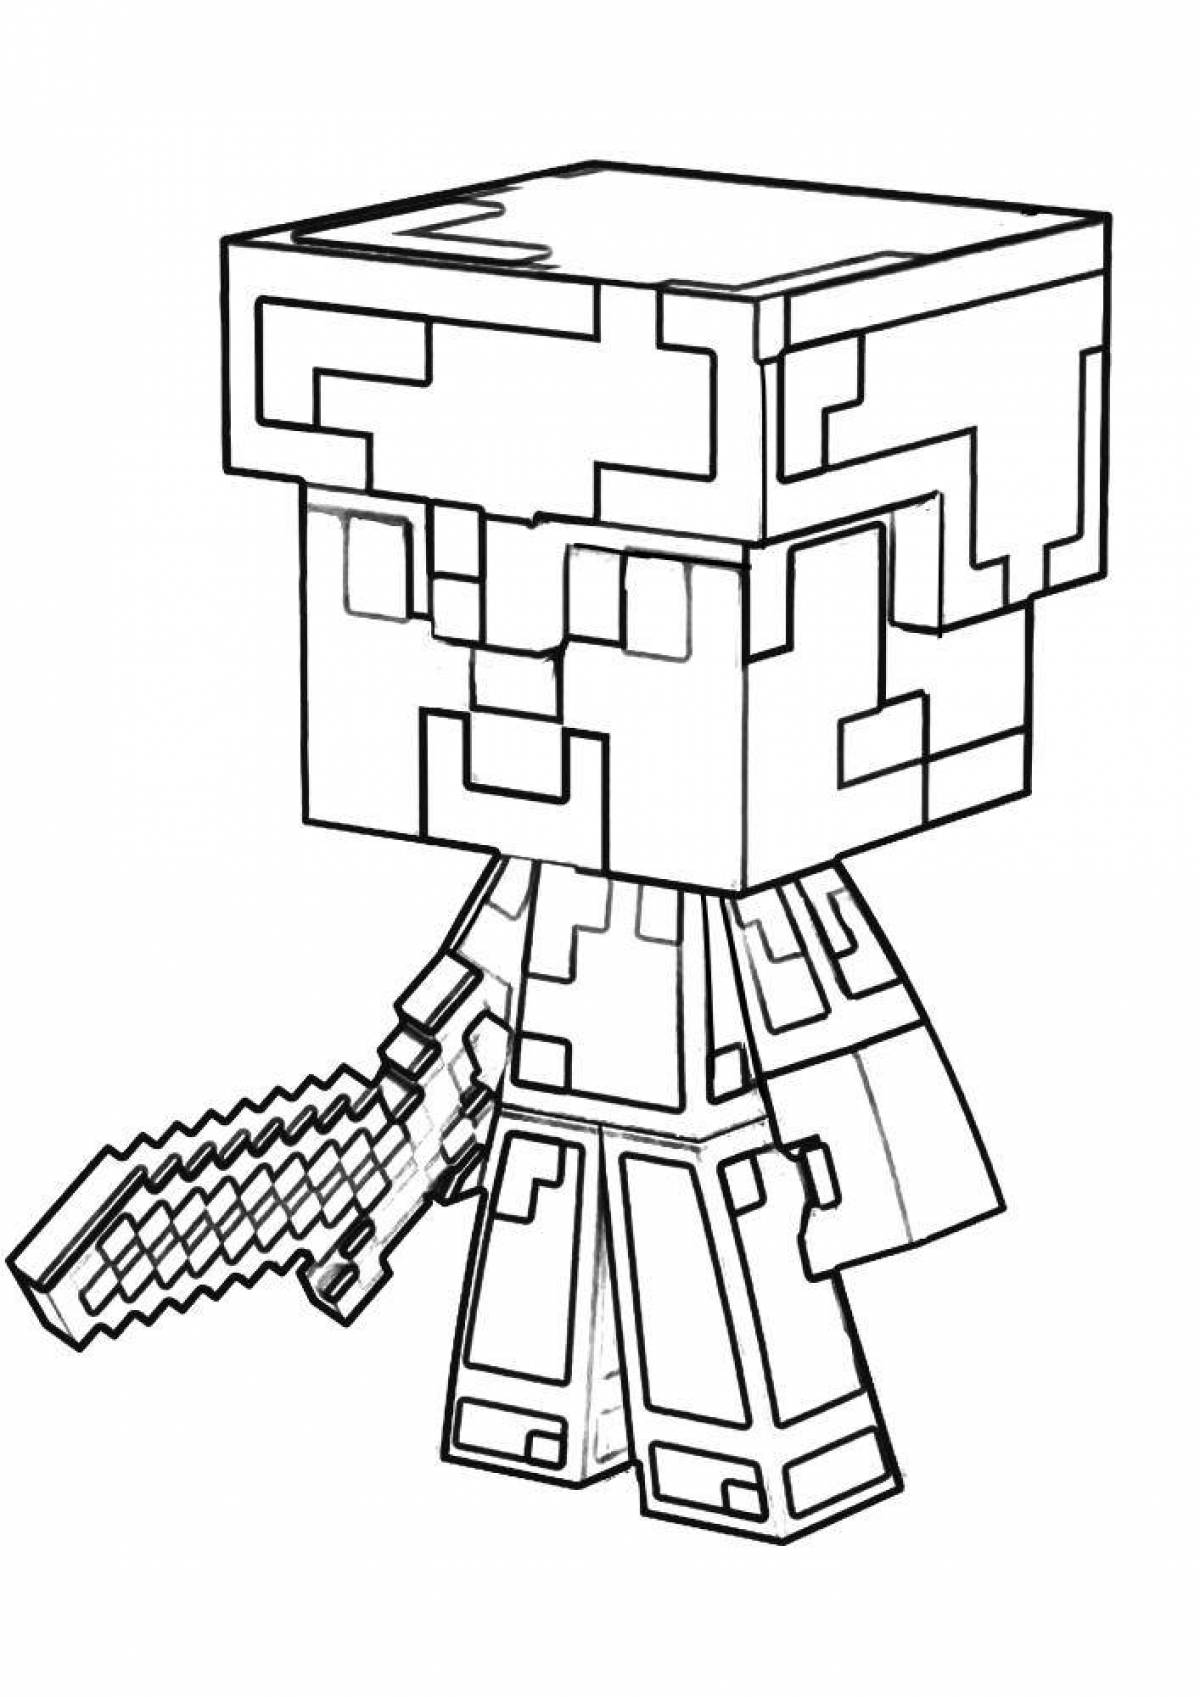 Exciting minecraft heroes coloring page